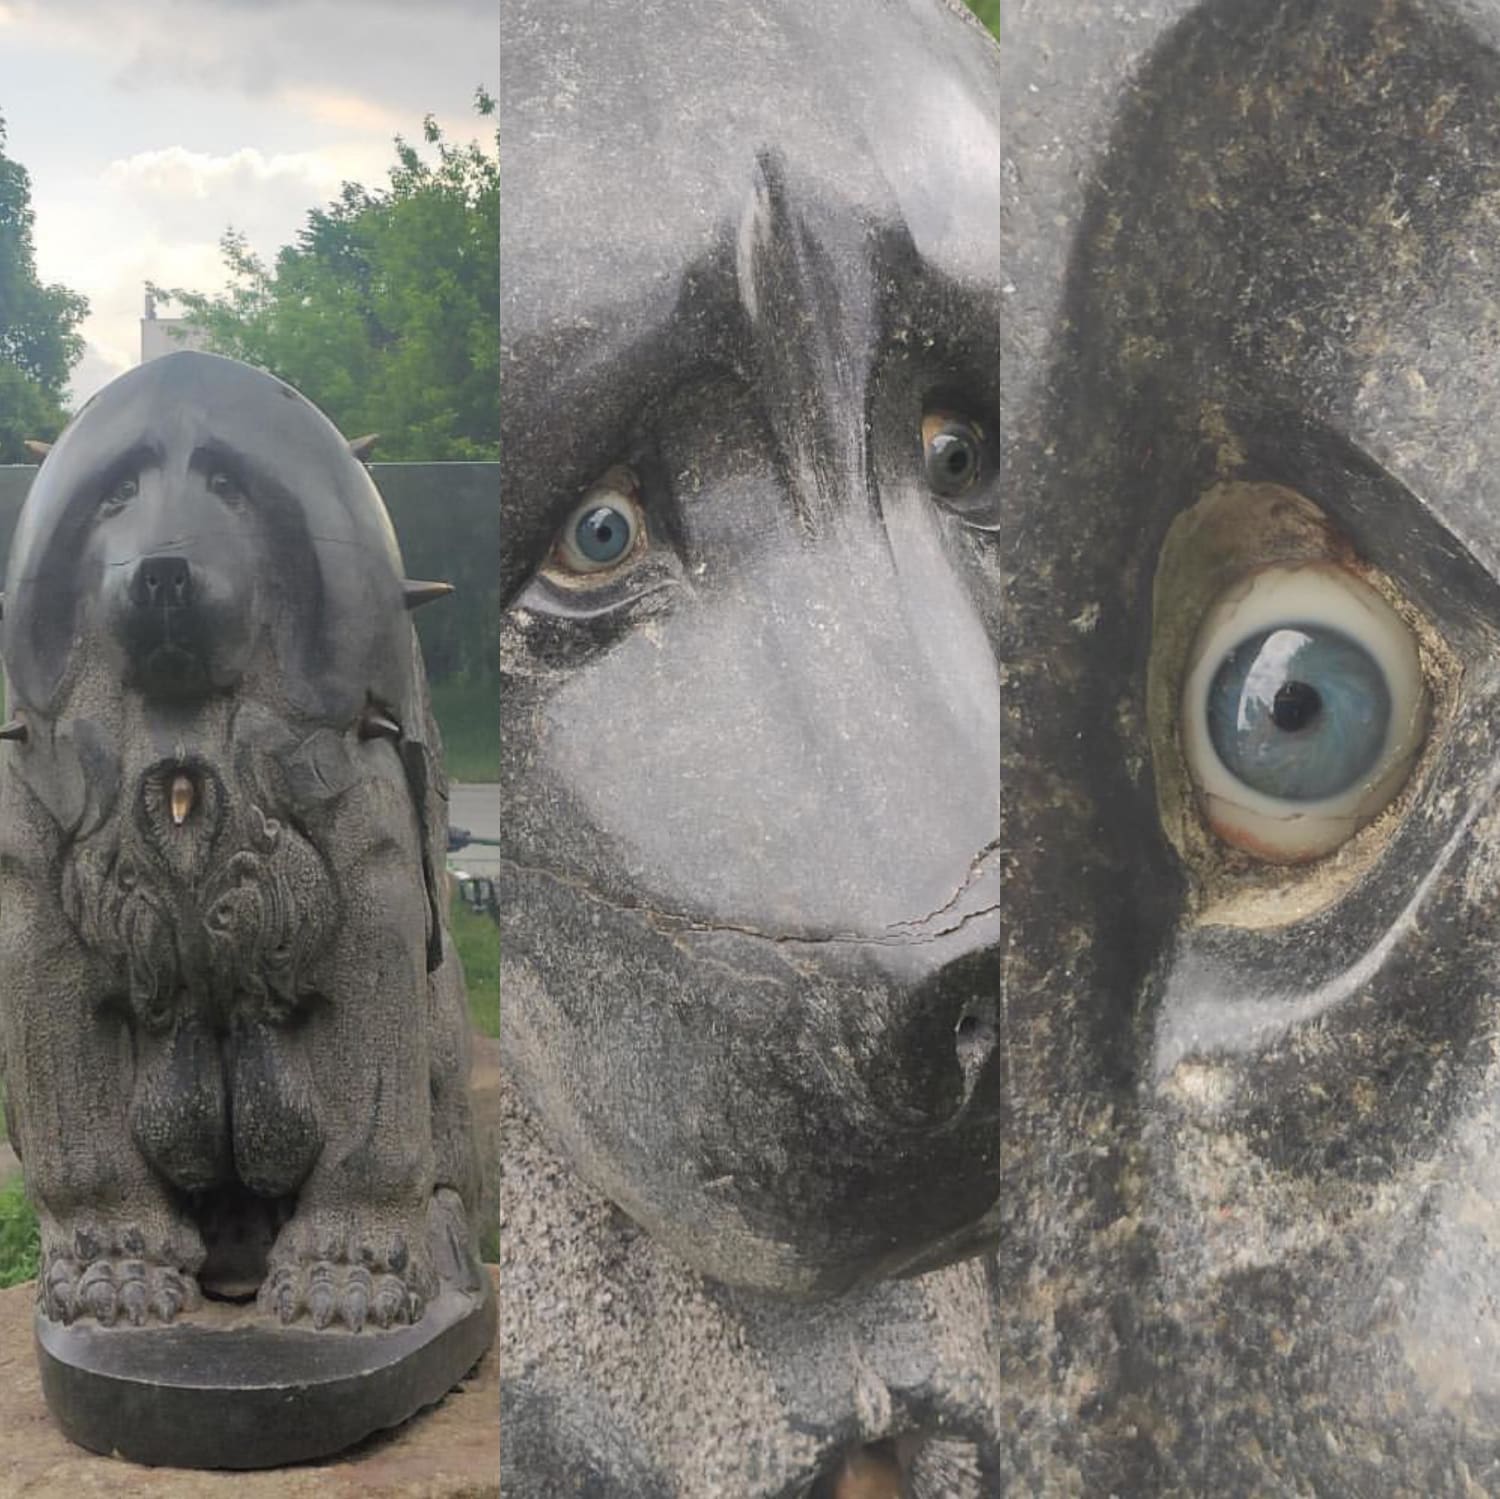 The eyes of this sphinx statue in Muzeon Park